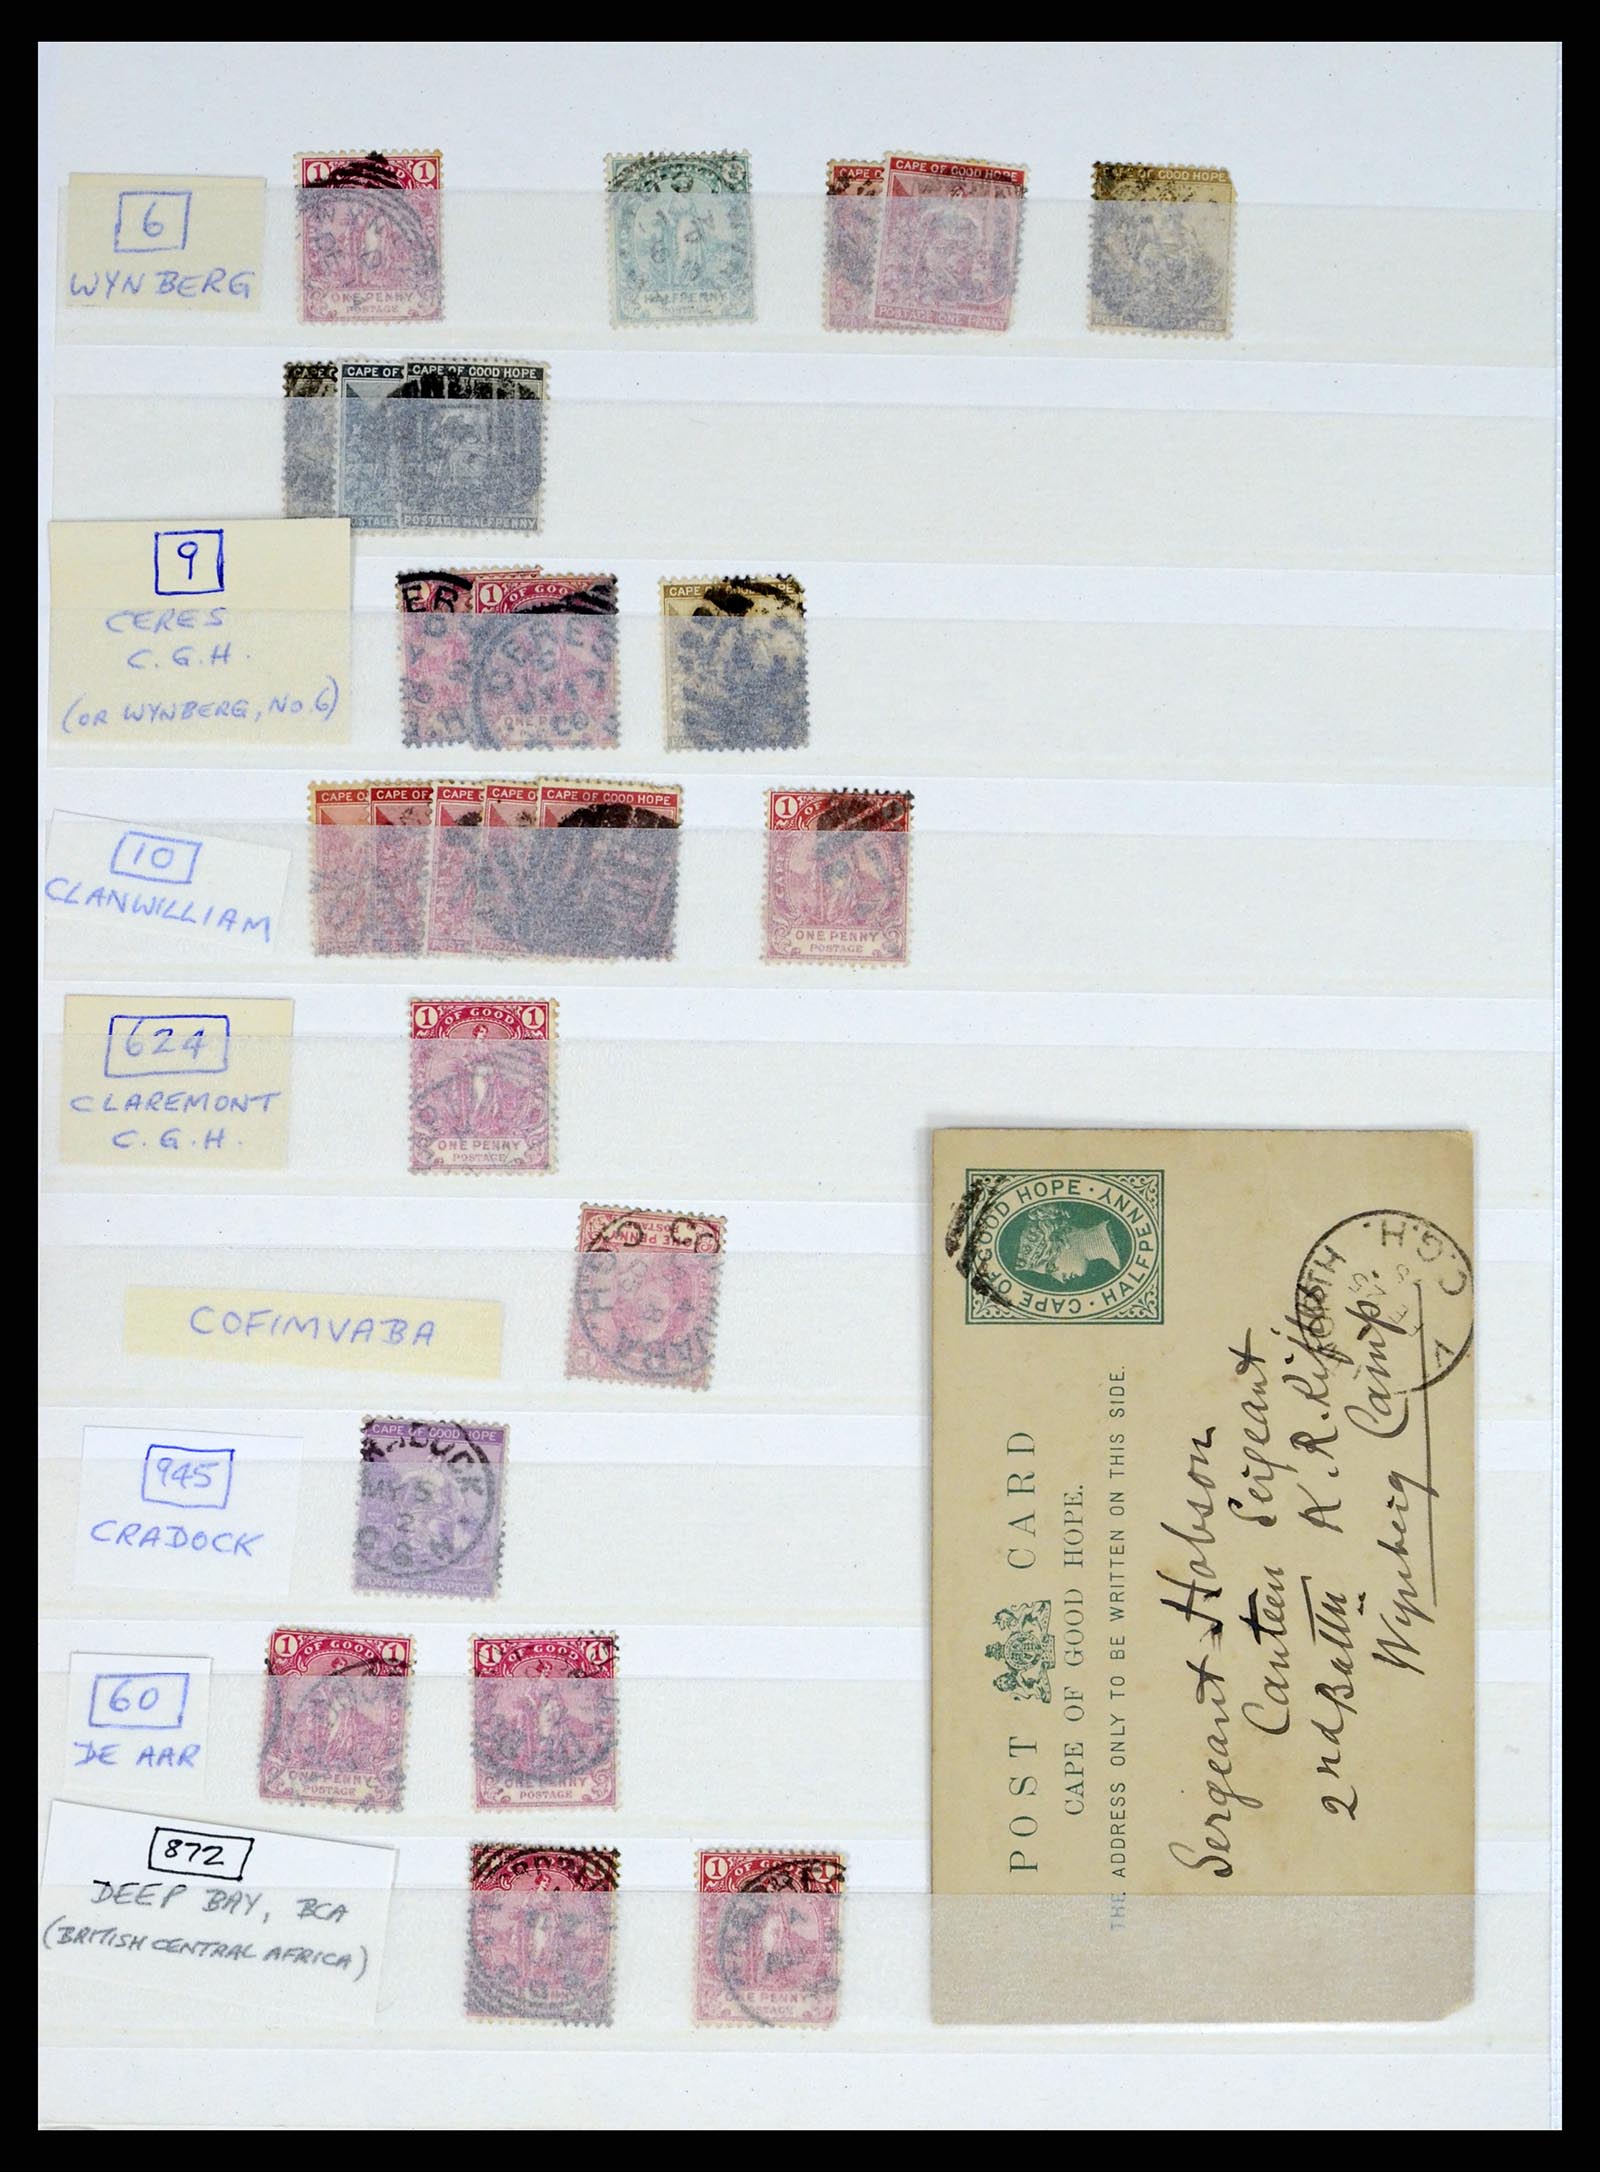 37549 075 - Stamp collection 37549 Cape of Good Hope cancels 1890-1910.